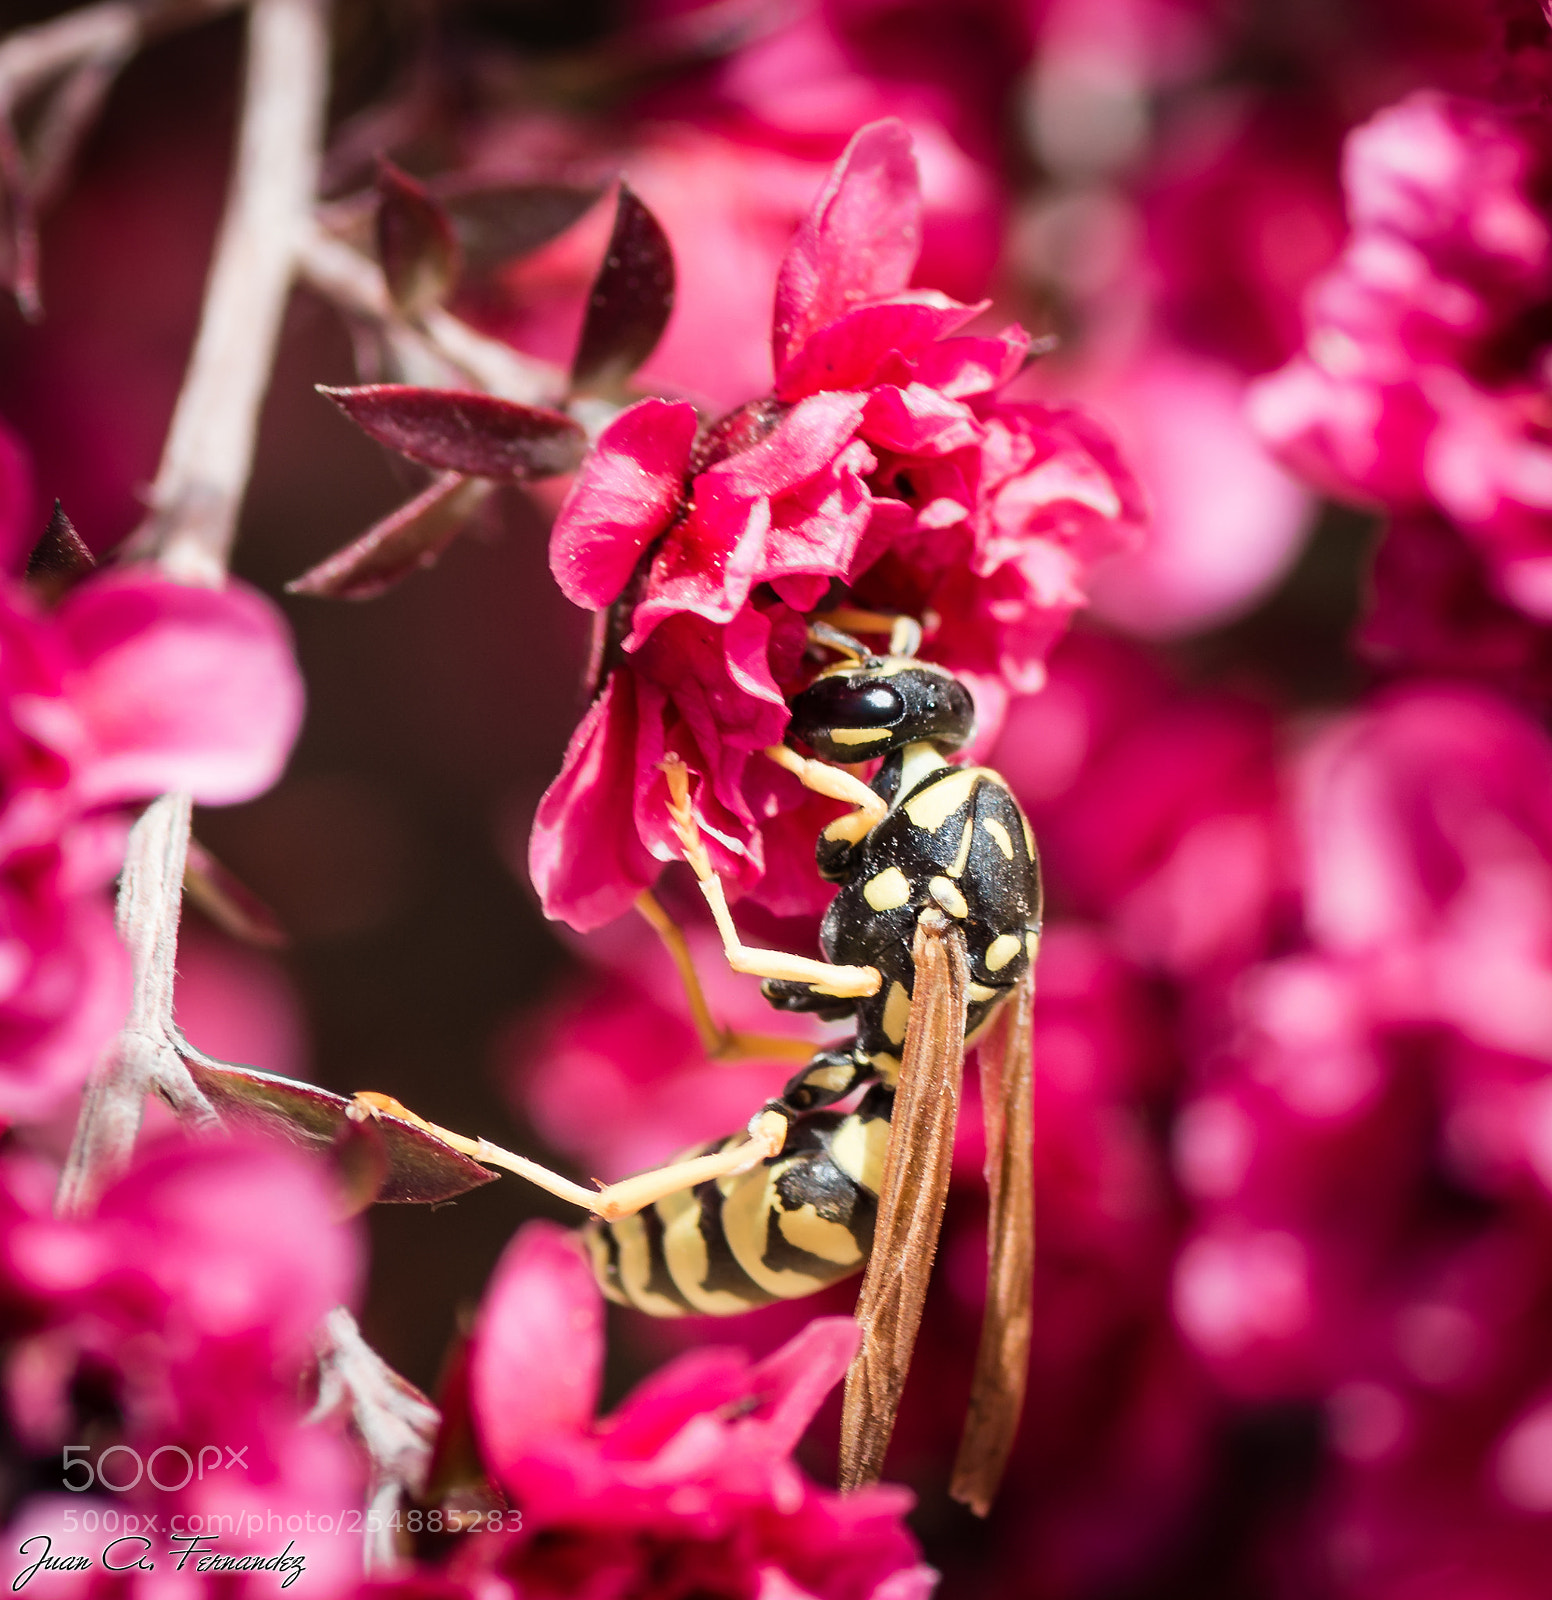 Nikon D7200 sample photo. Wasp lunch photography